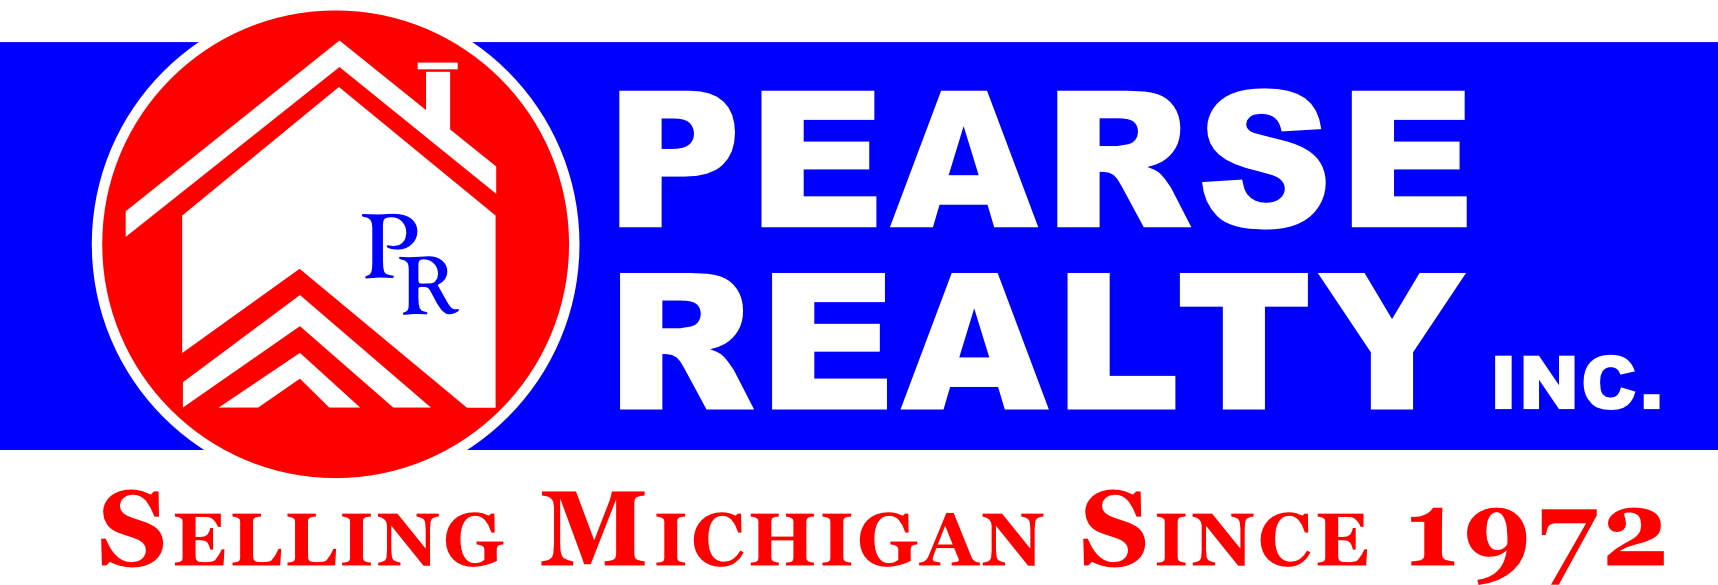 Pearse Realty Inc.